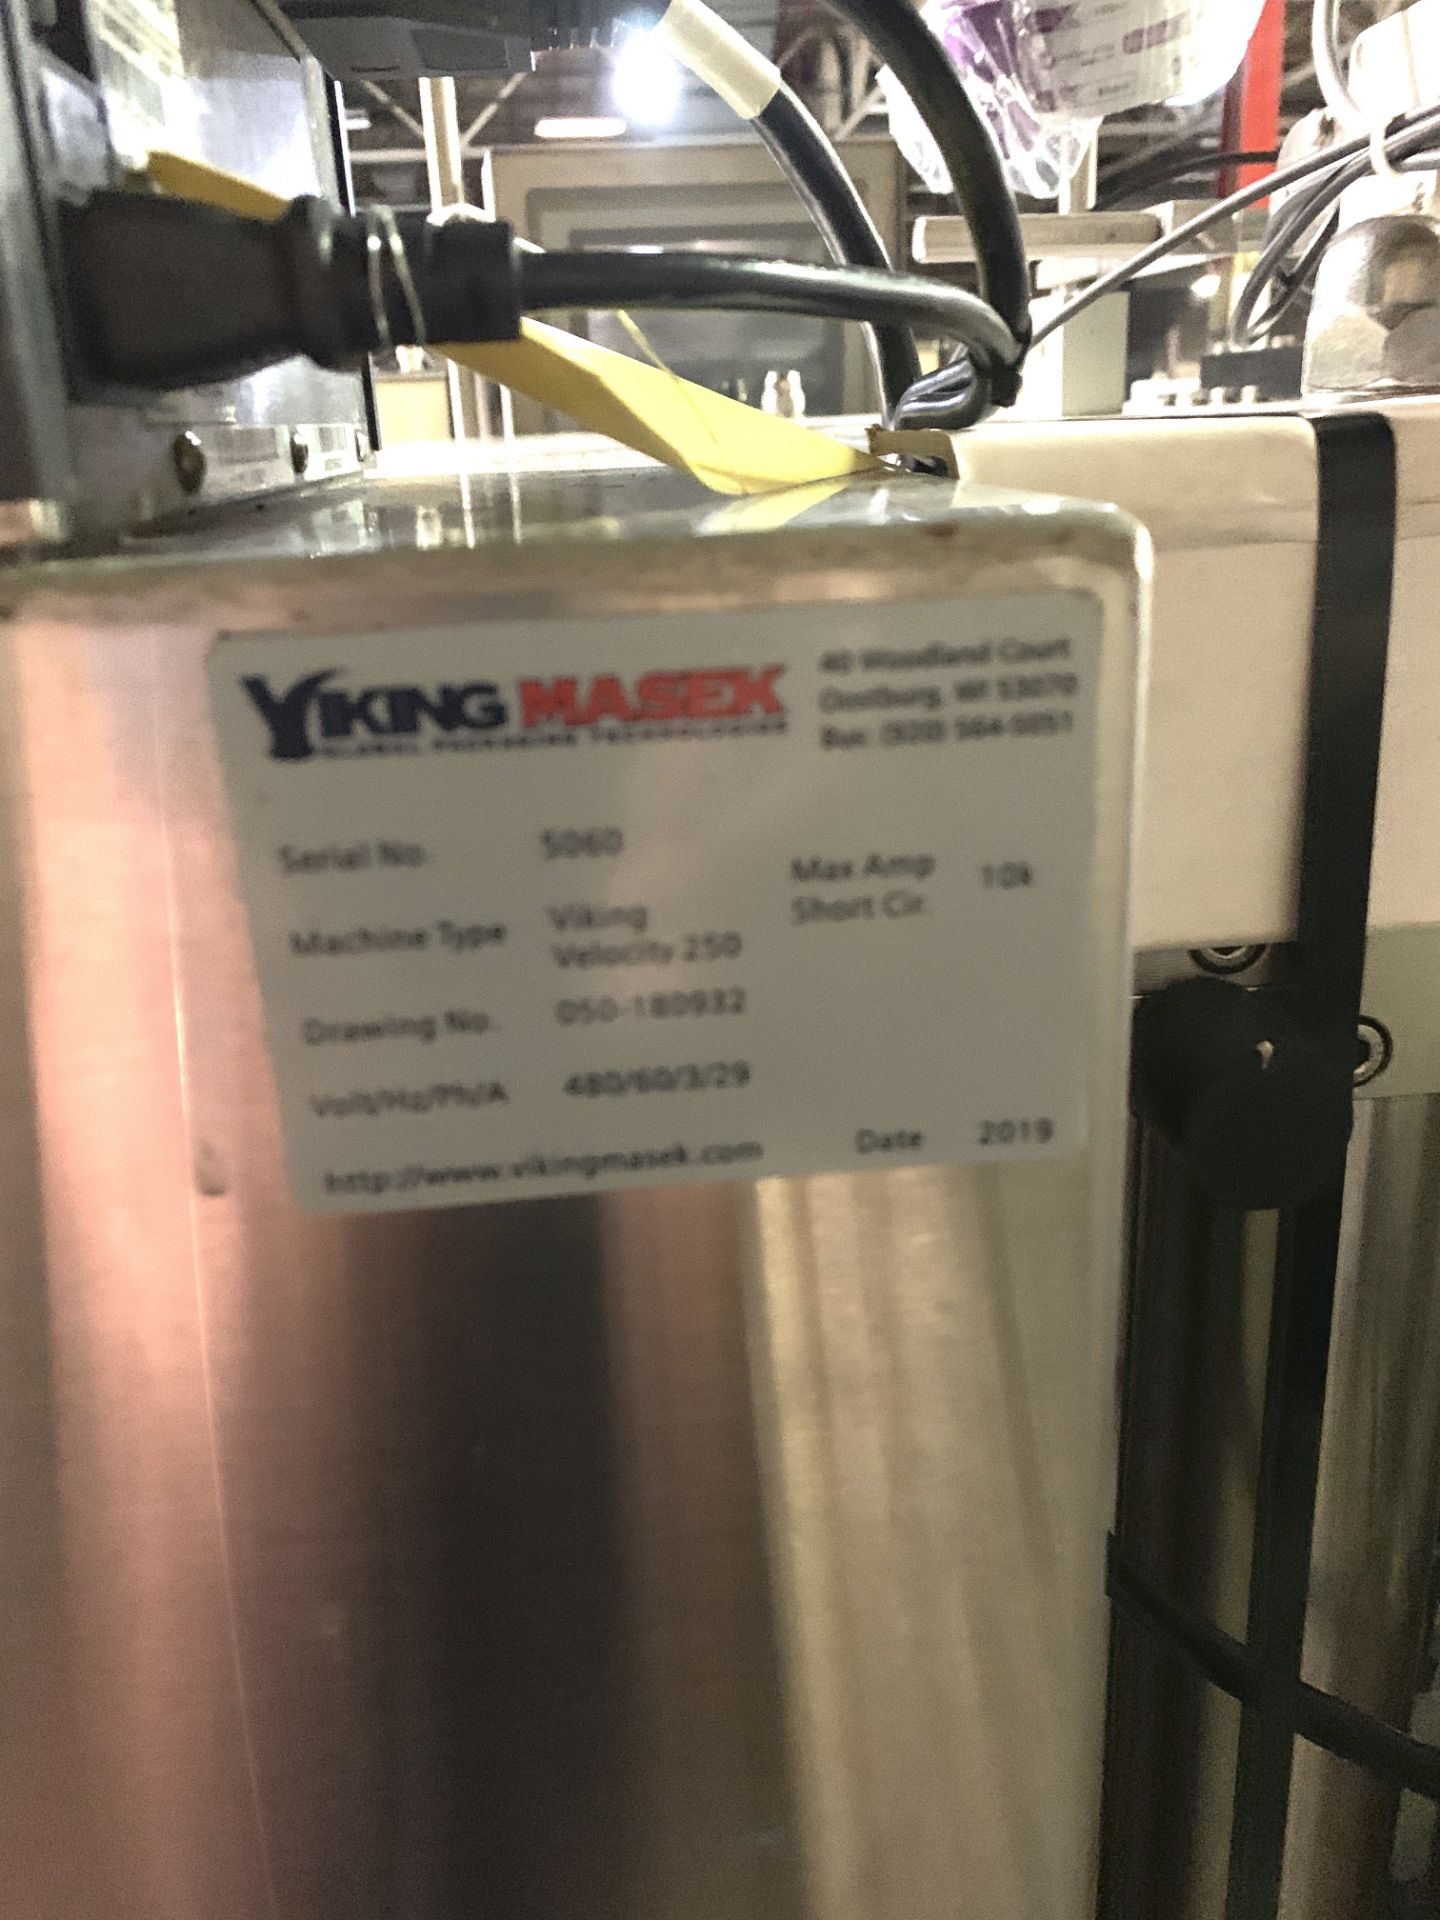 2019 Viking Masek; VELOCITY 250 VFFS Continuous Bagmaker with Allen Bradley Panelview Plus, S/N: - Image 2 of 6